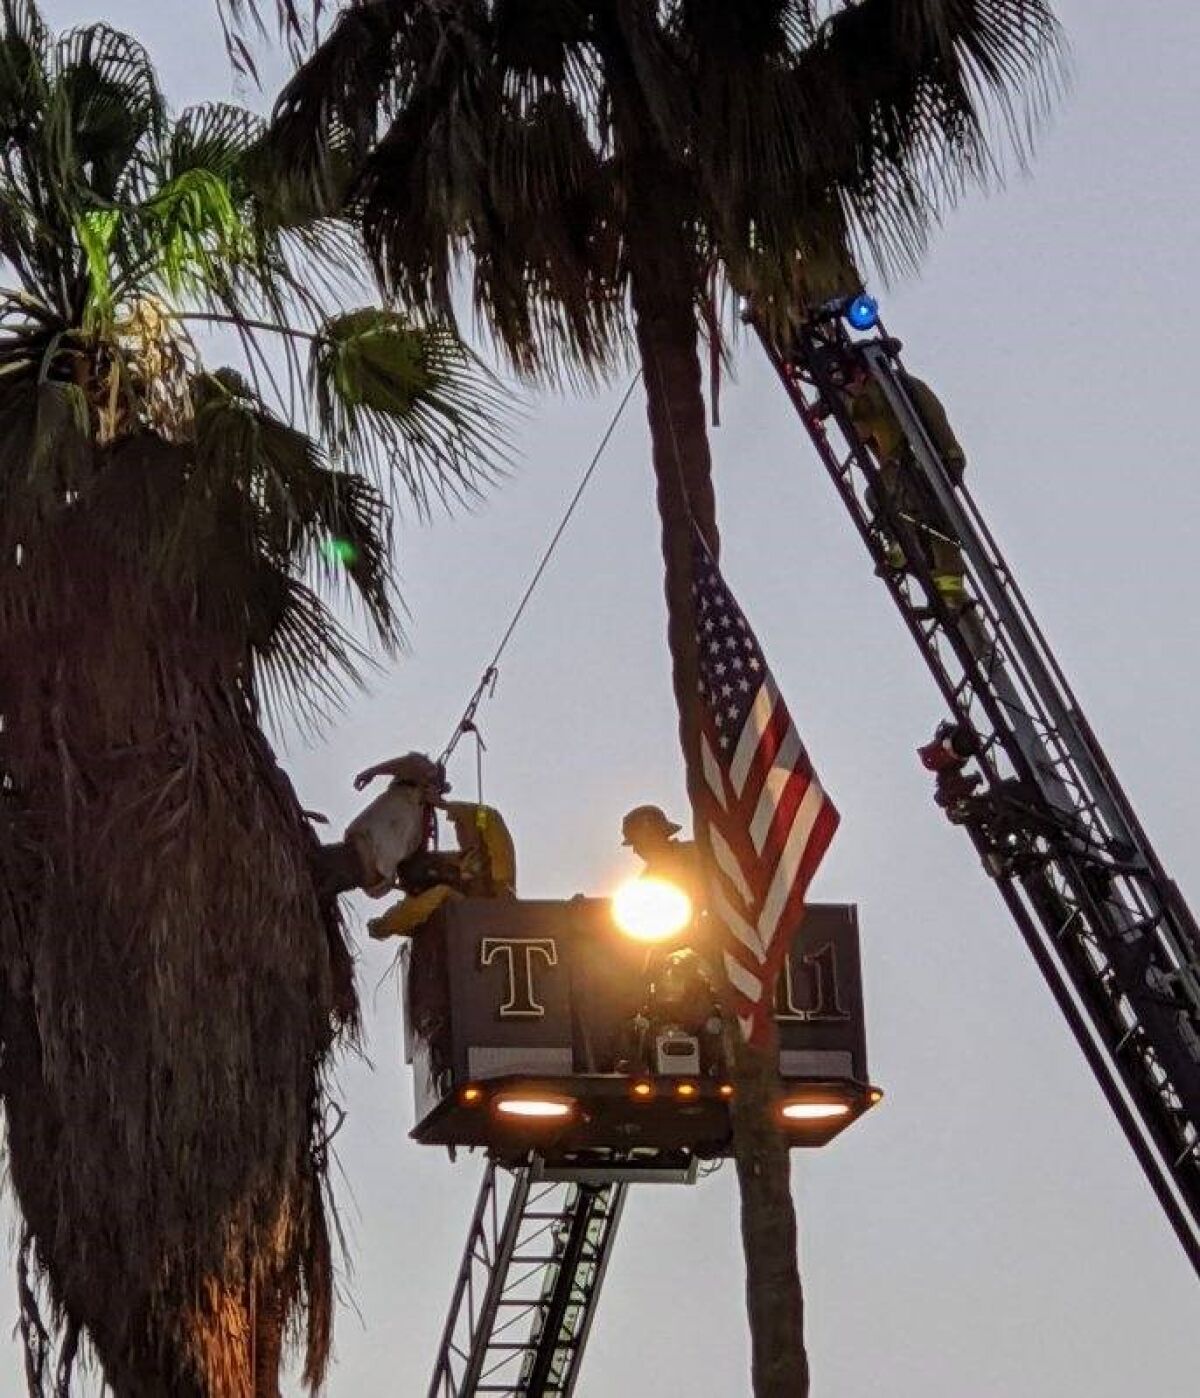 San Miguel Fire & Rescue crews work to save injured tree trimmer about 70 feet up a palm tree Thursday night in Spring Valley